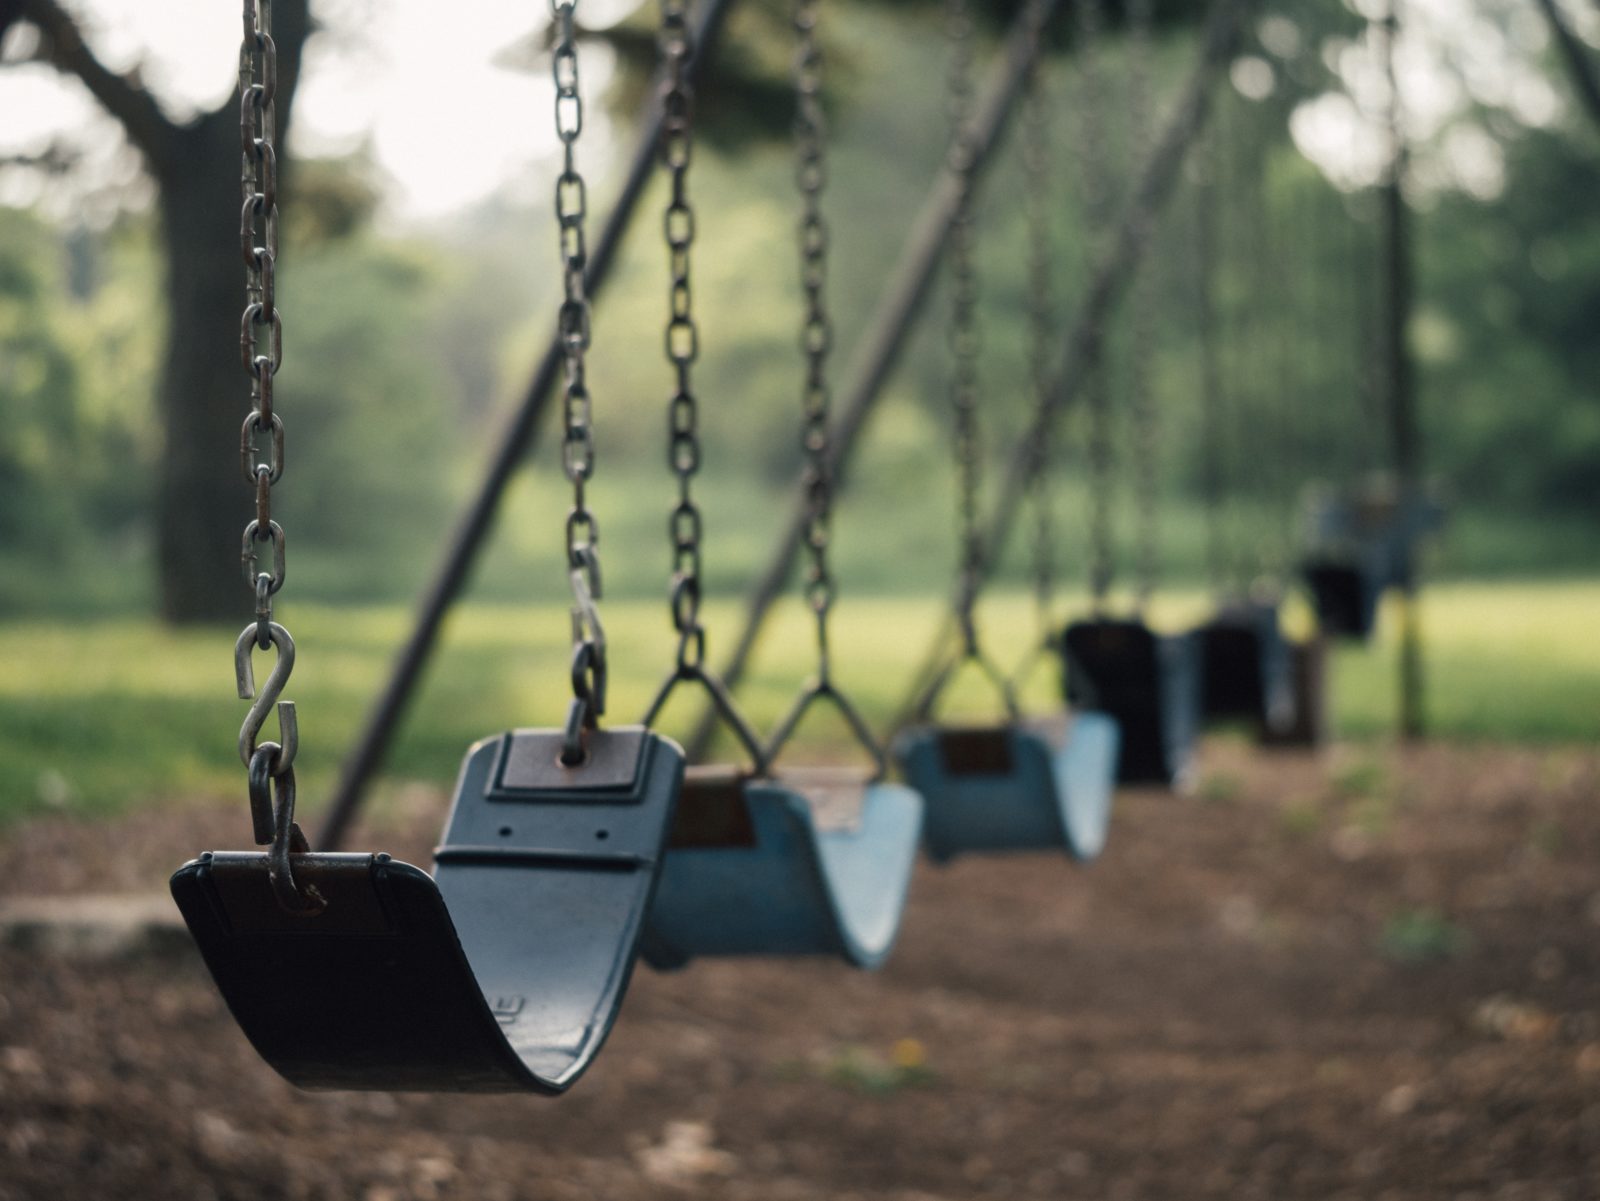 A row of empty swings on a playground swingset